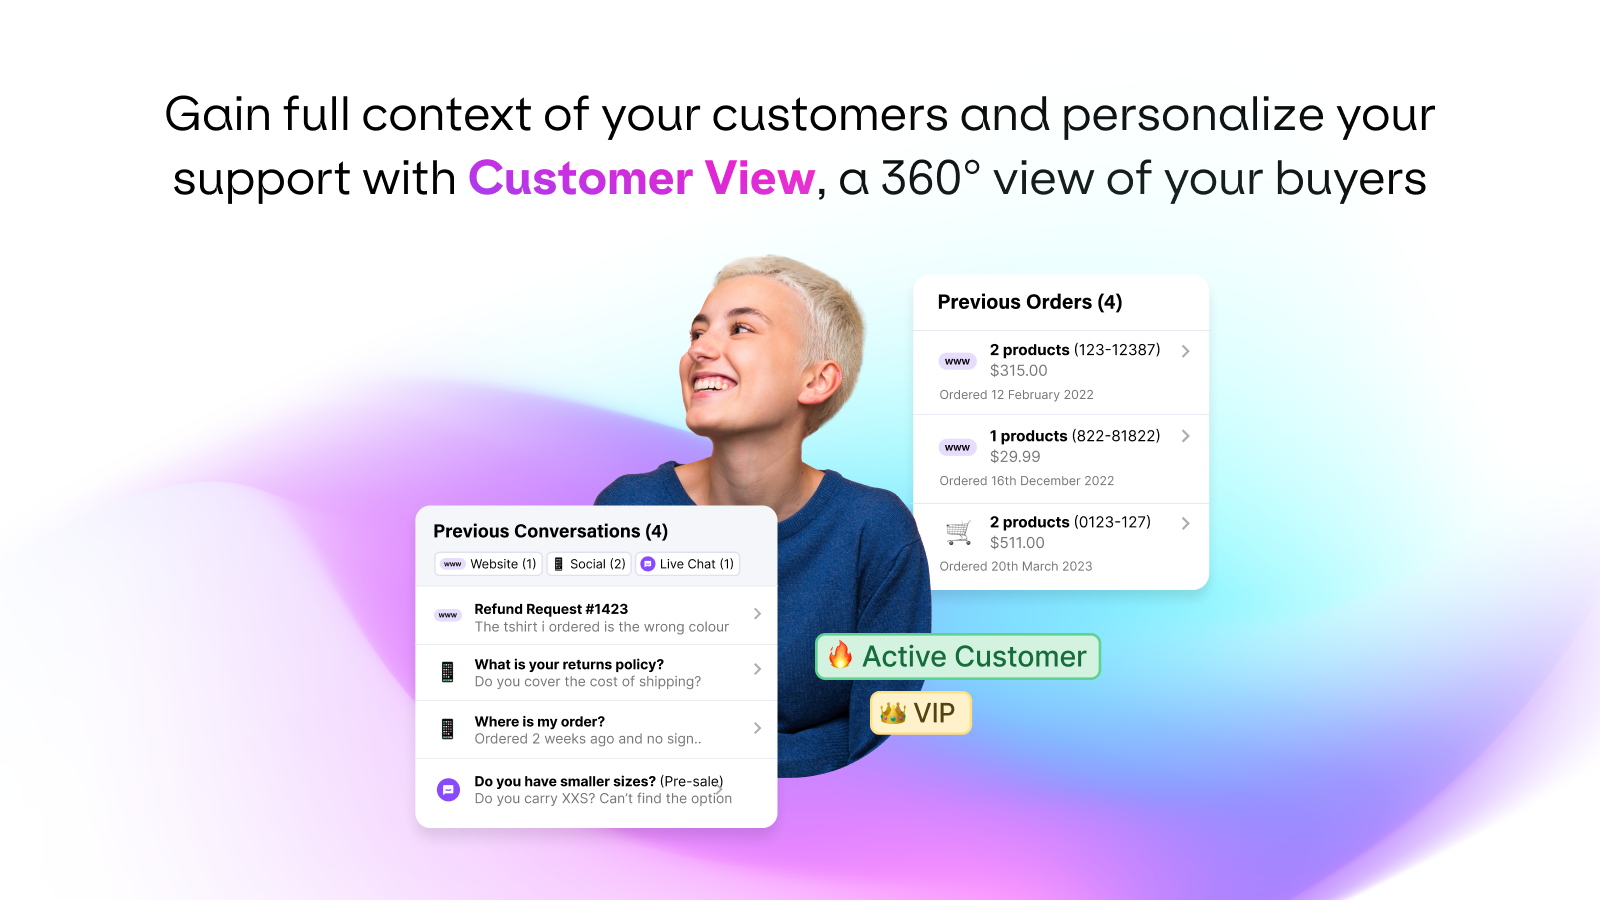 Personalize your customer service with a 360° view of your buyer